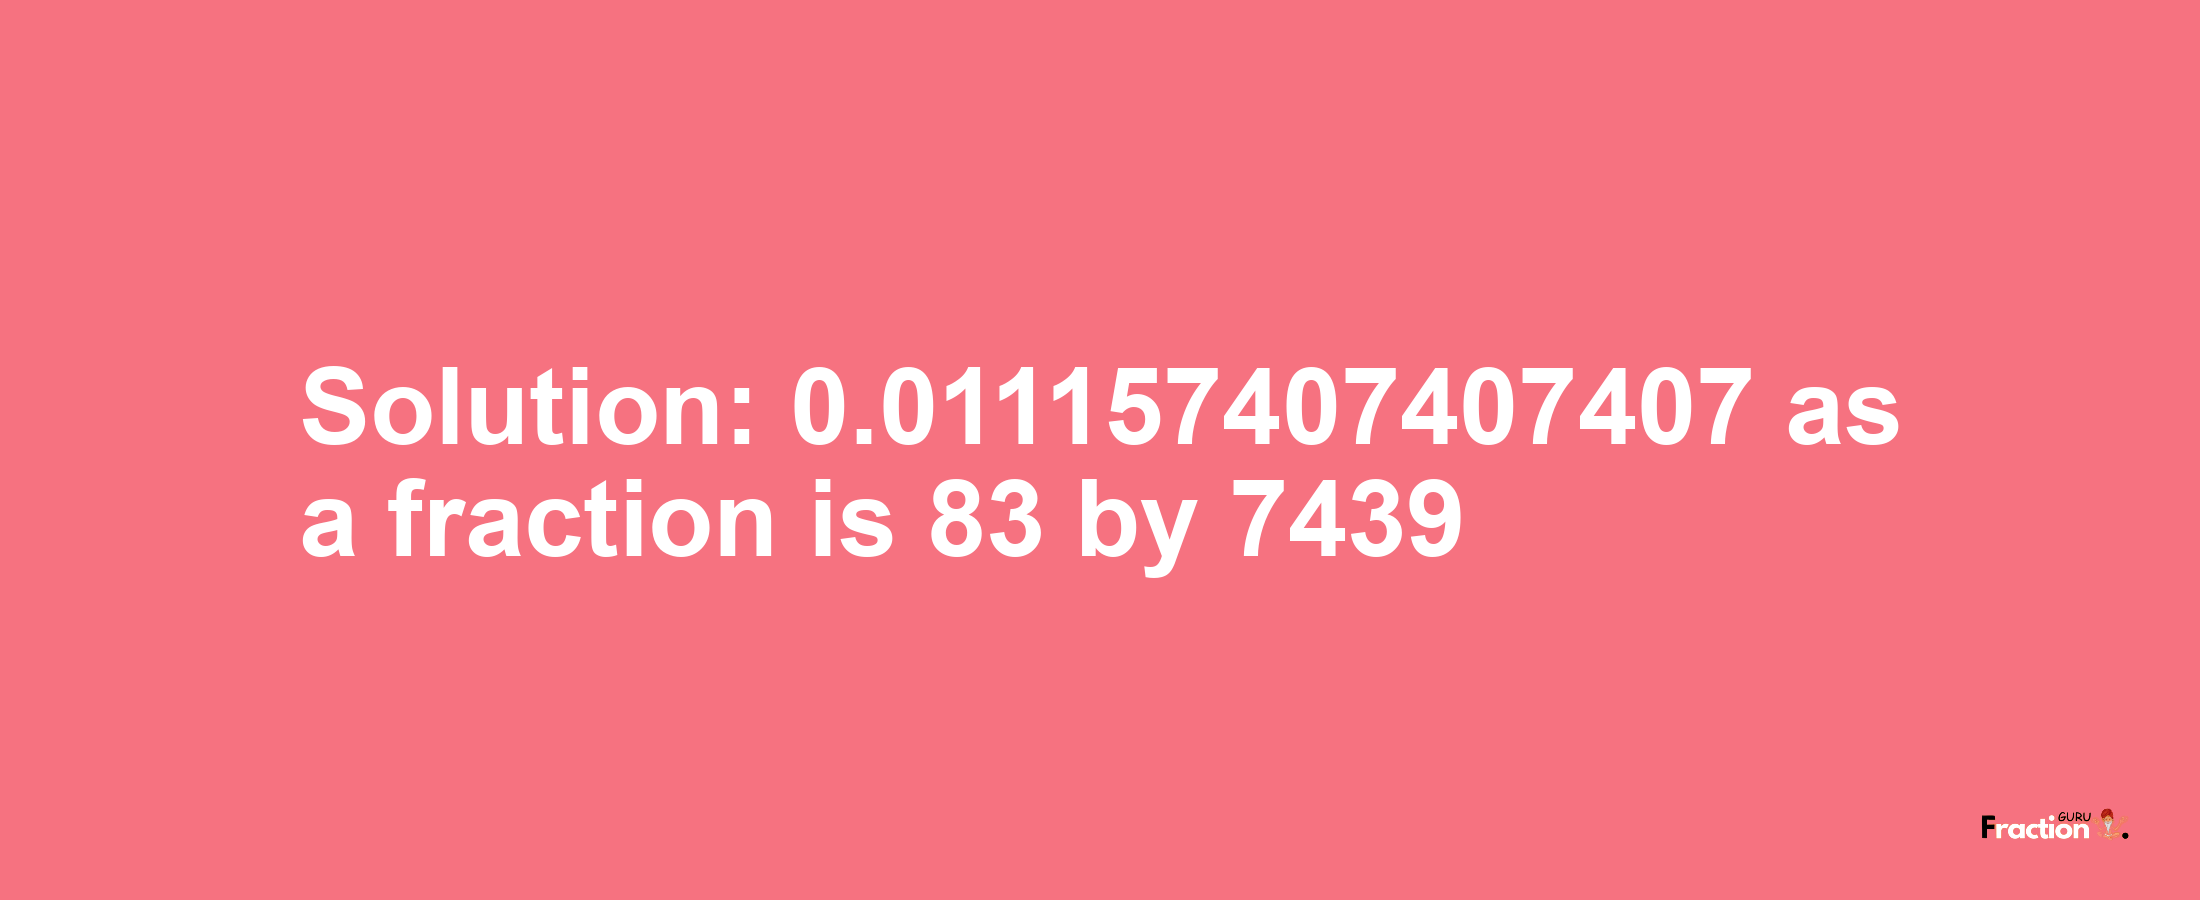 Solution:0.011157407407407 as a fraction is 83/7439